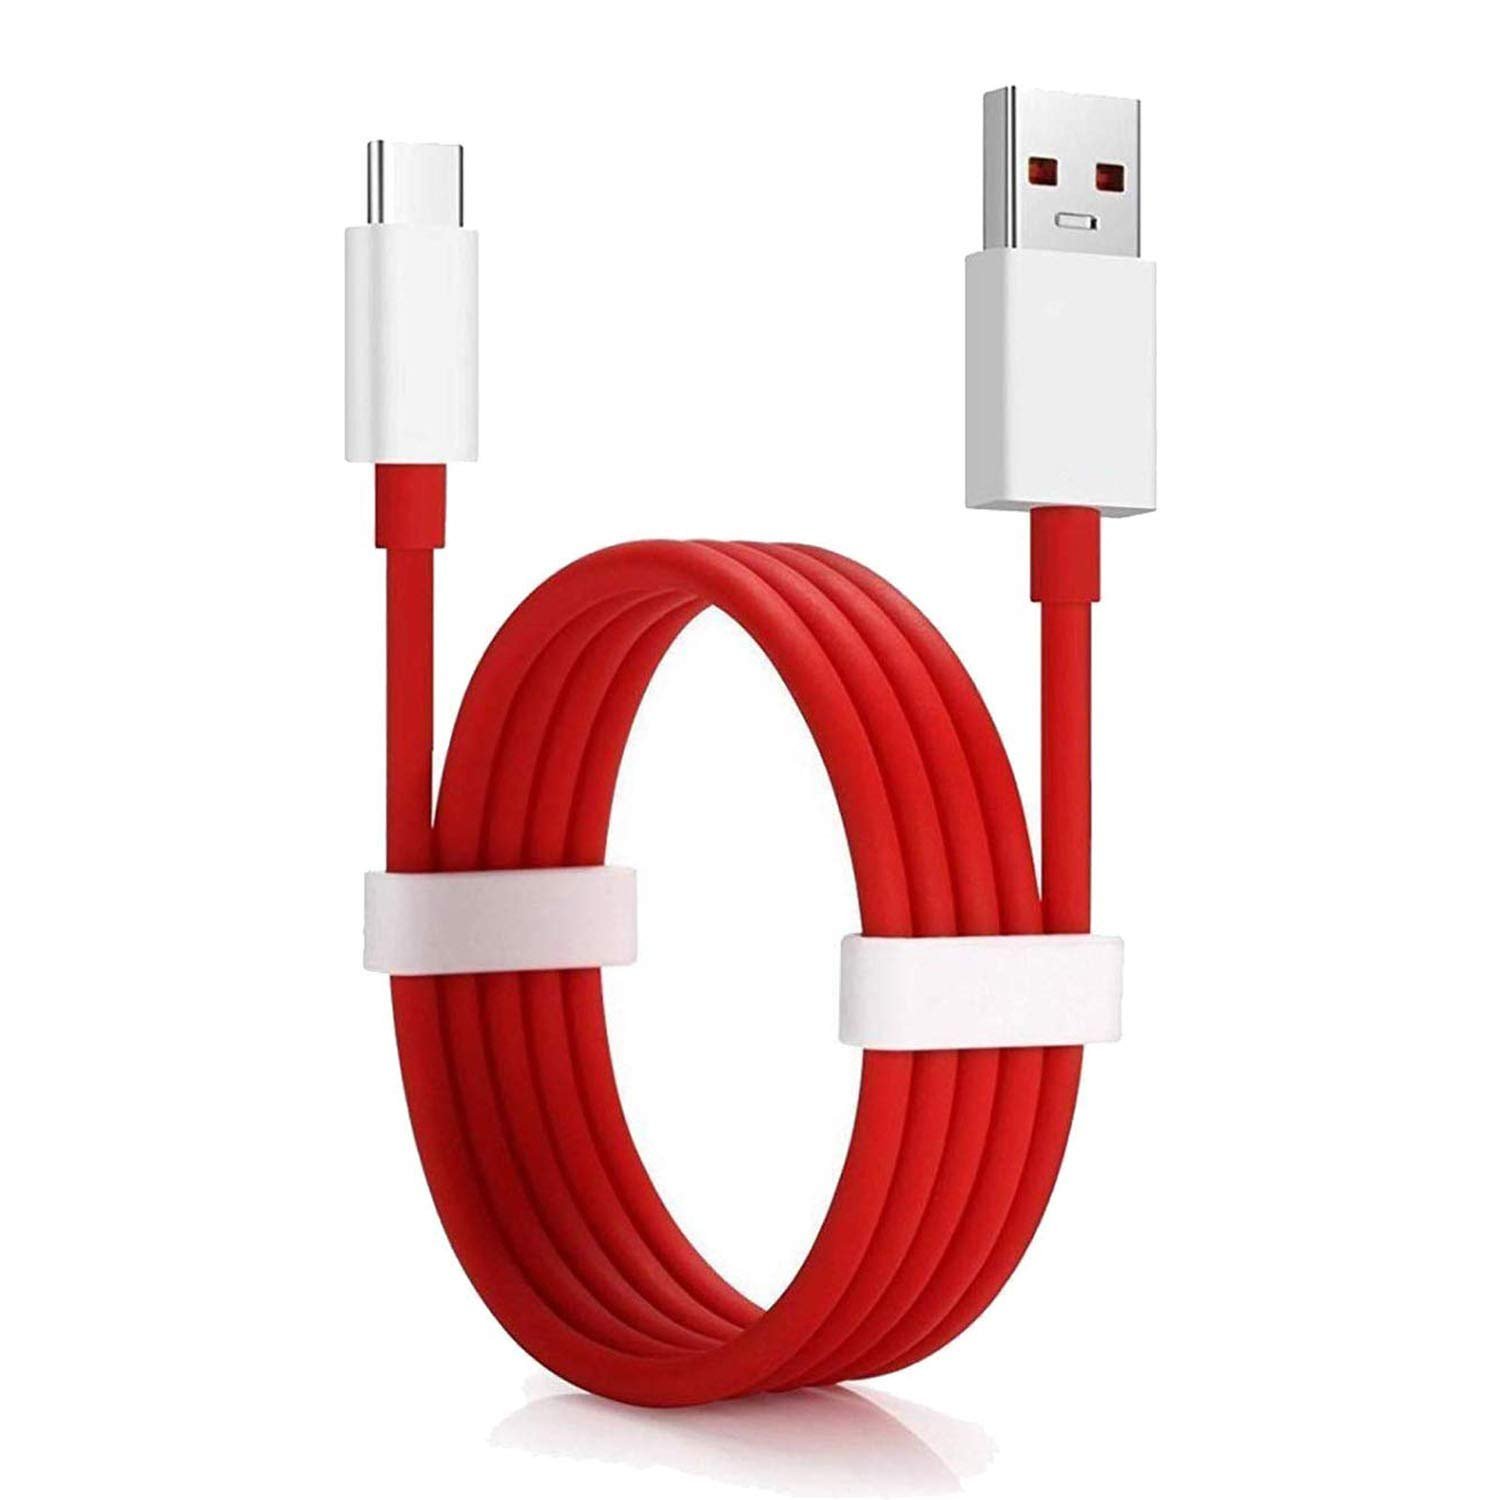 OMI Warp charging cable compatible for One Plus 7 Pro / 7T / 7T Pro and Dash charge for OnePlus 3 / 3T / 5 / 5T / 6 / 6T /